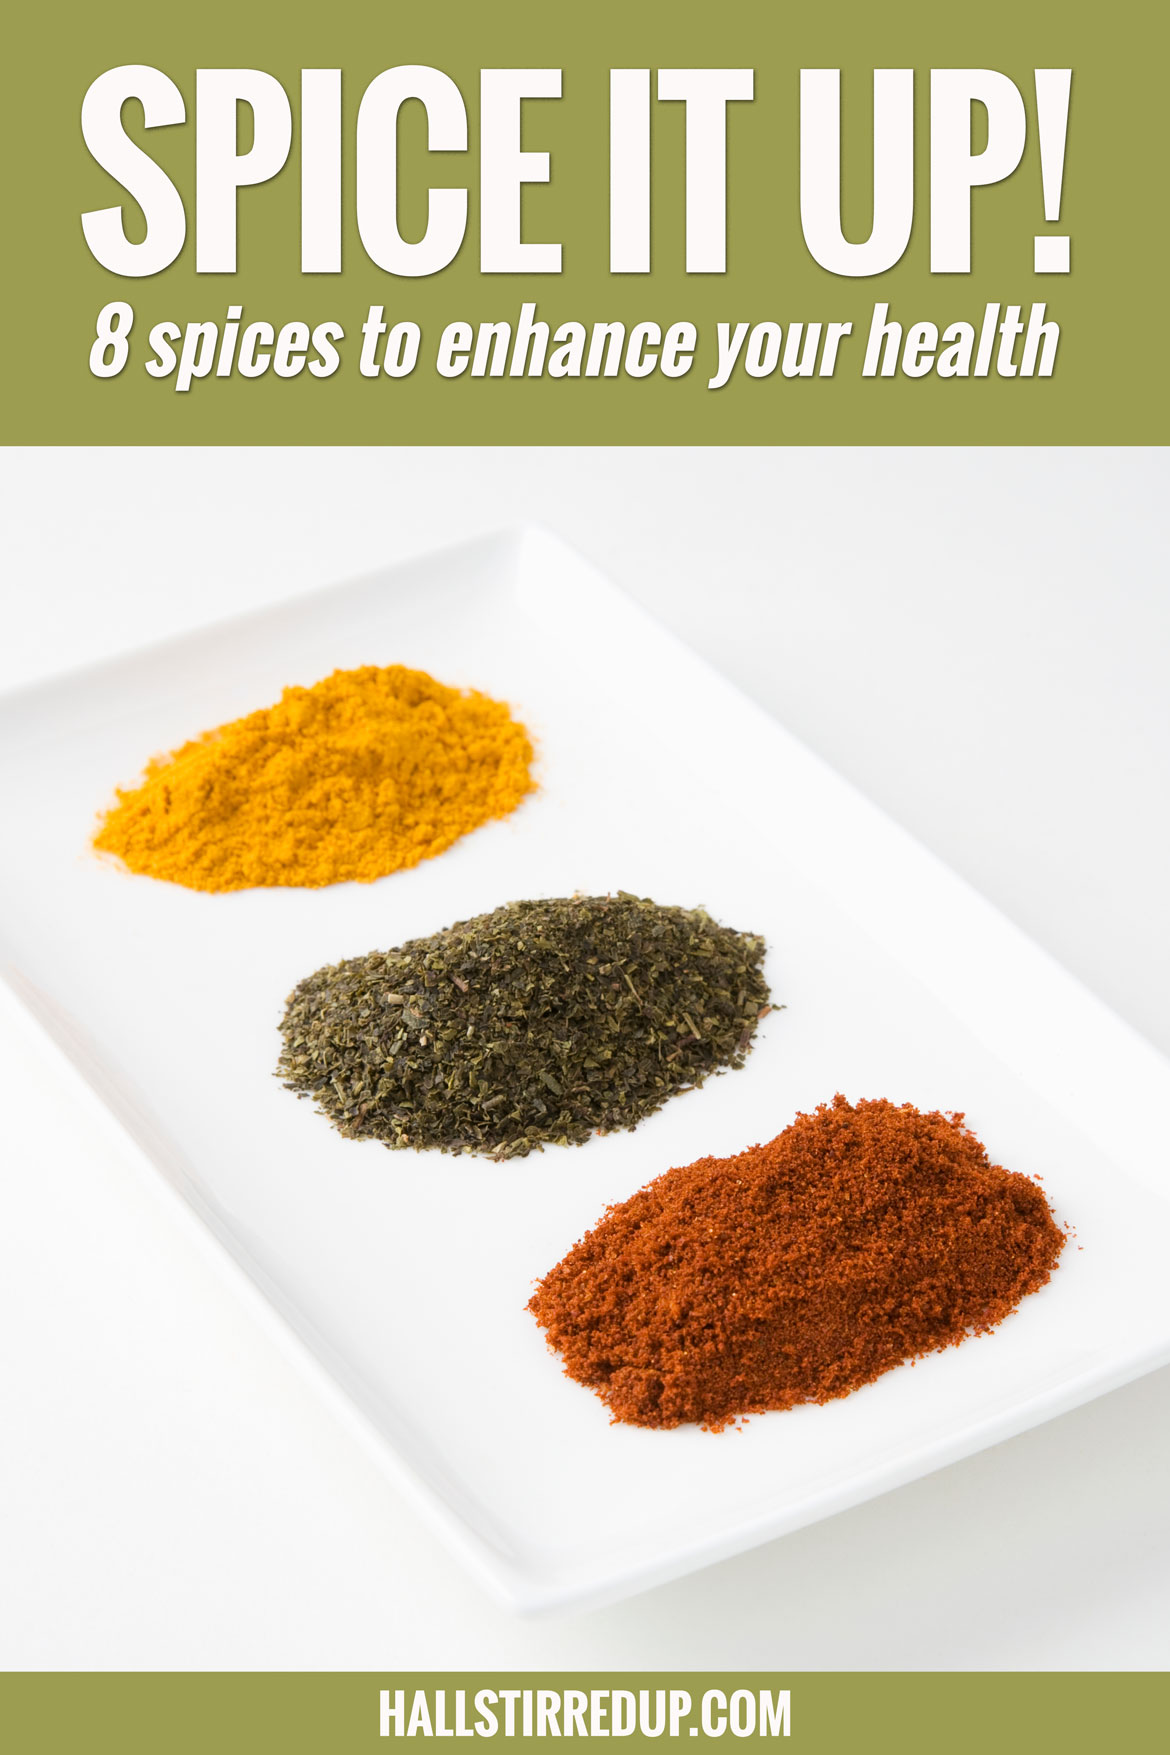 Spice it up 8 spices to enhance your health